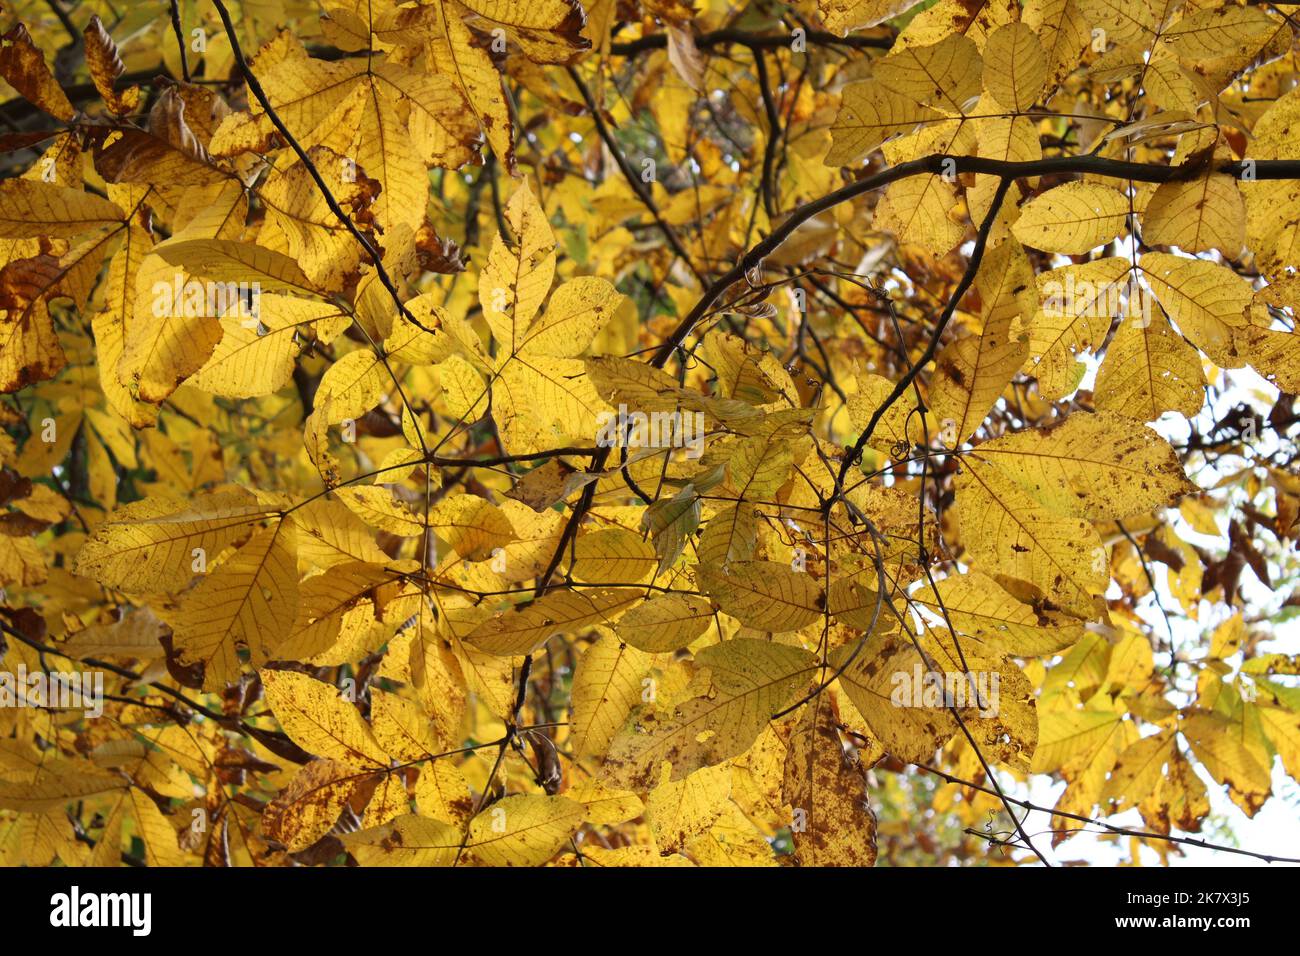 A Canopy of Yellow Shagbark Hickory Leaves in Autumn Stock Photo